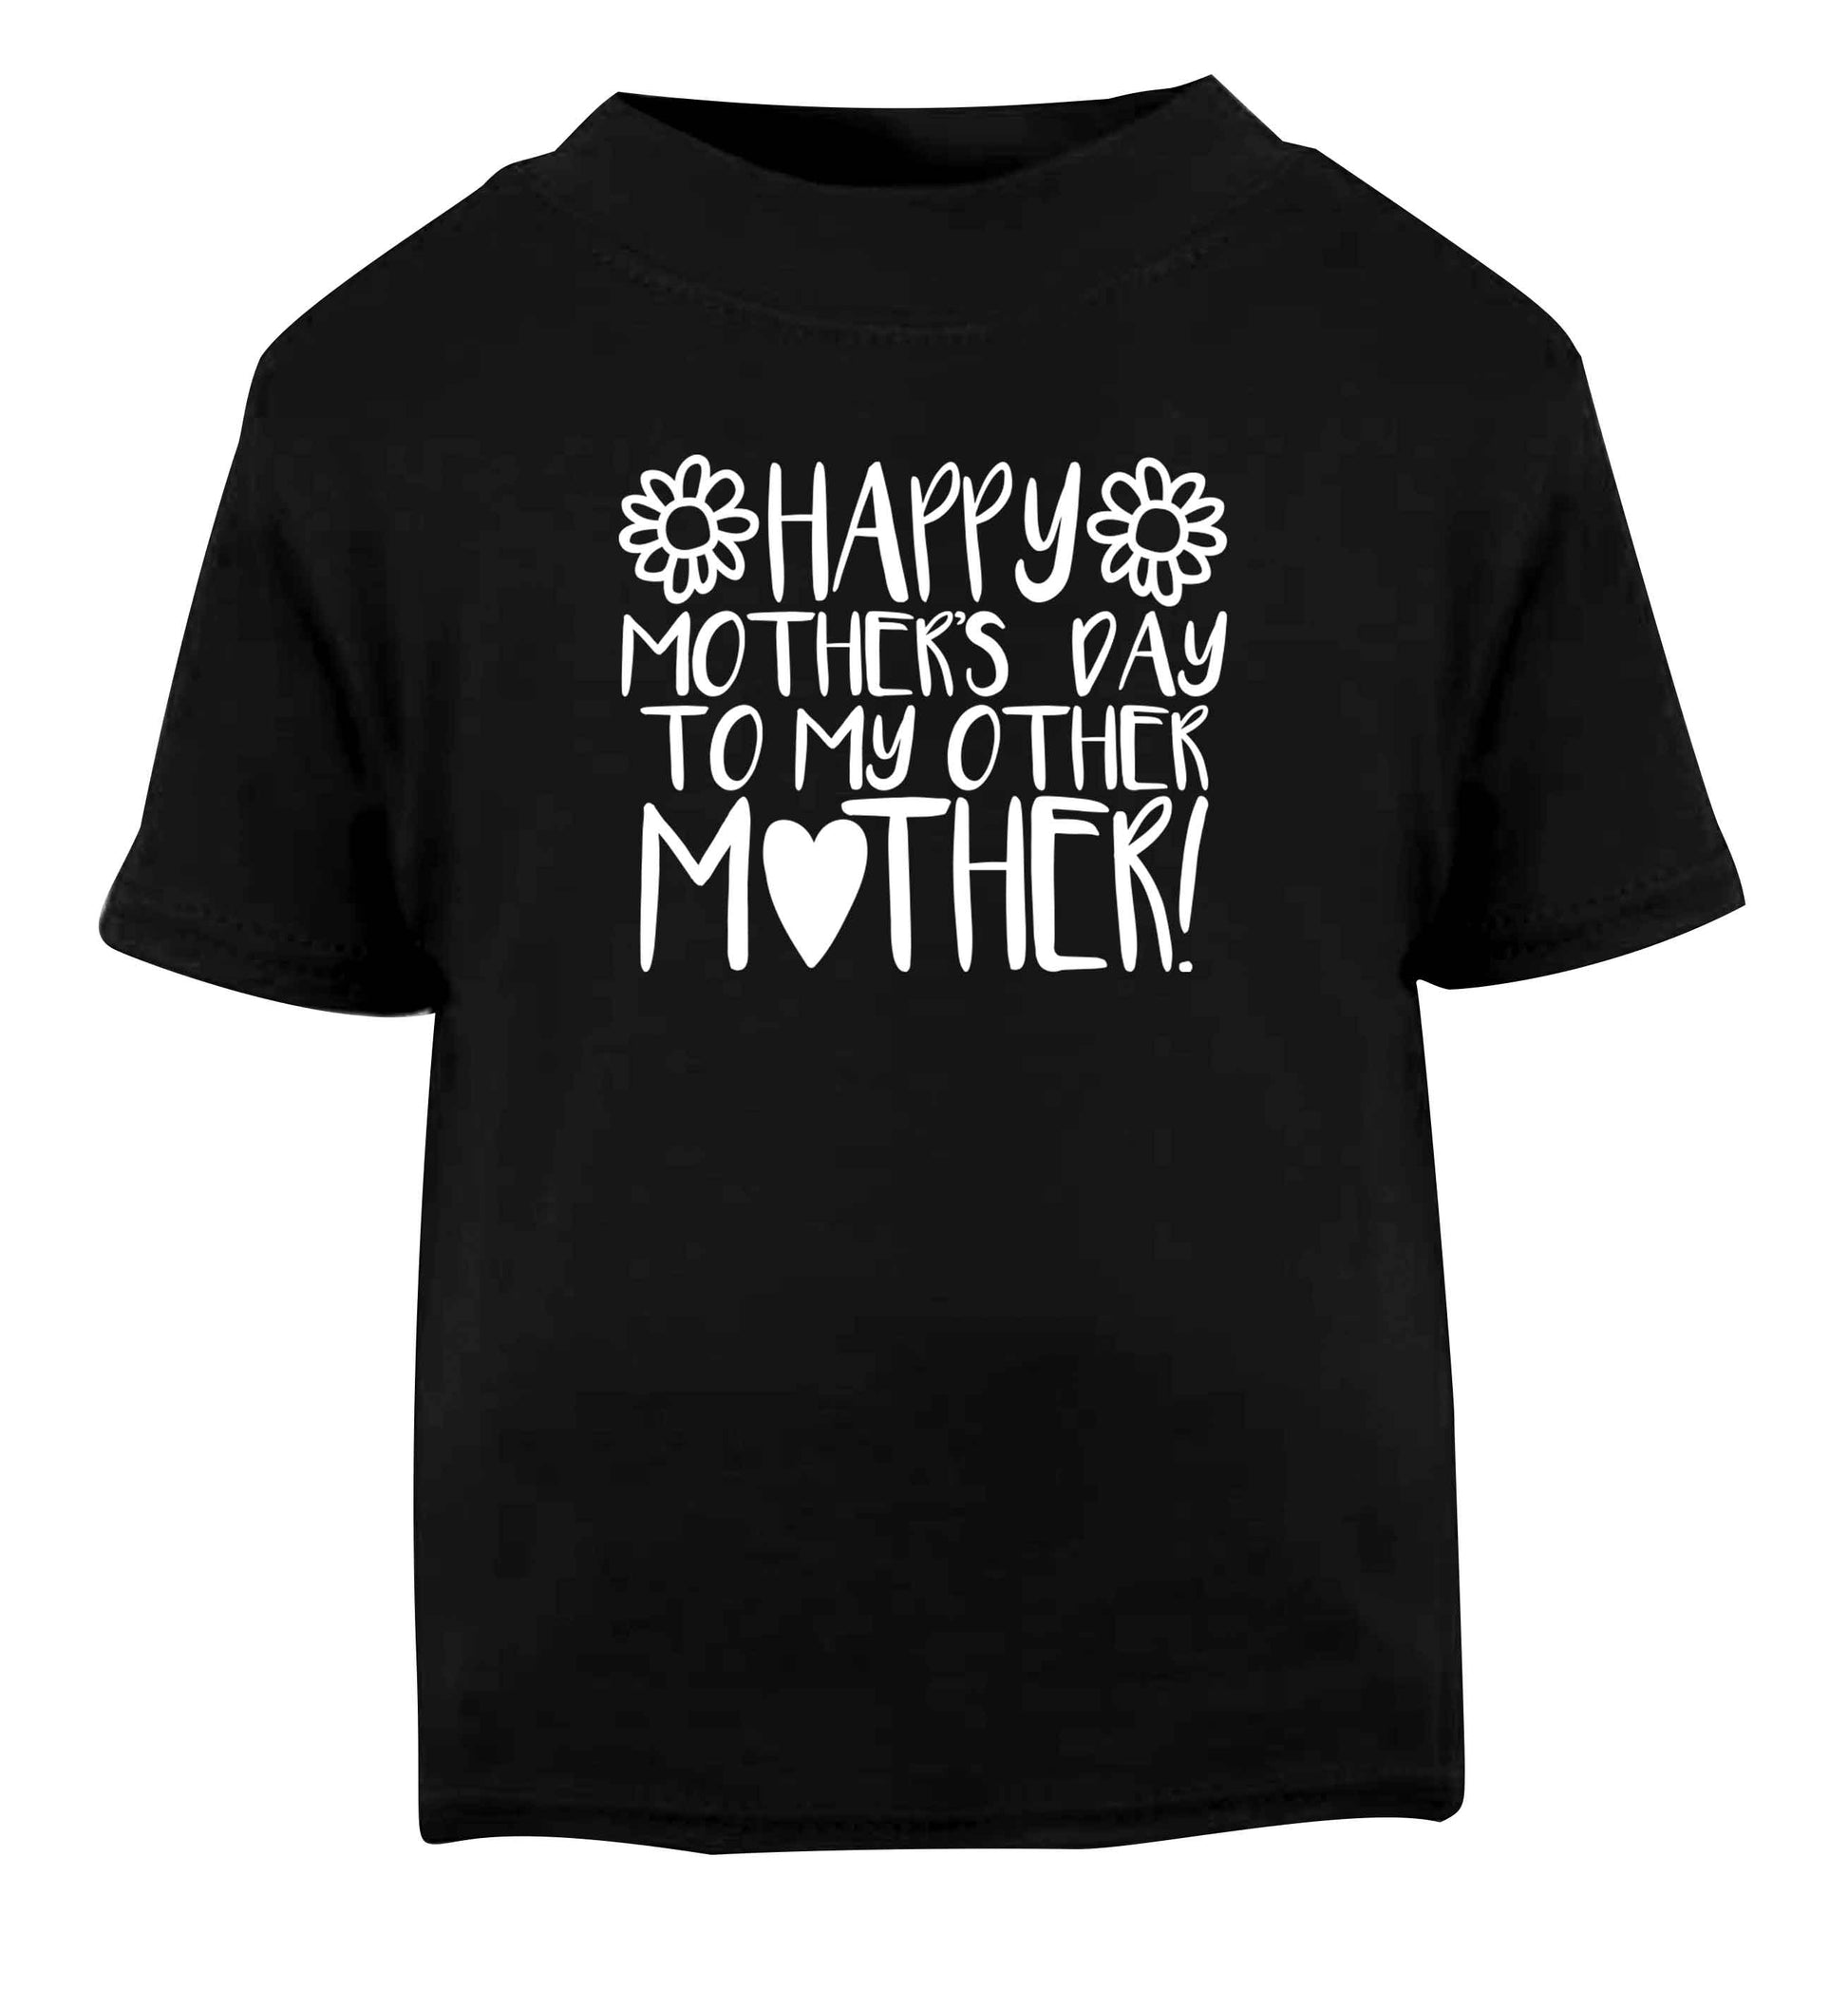 Happy mother's day to my other mother Black baby toddler Tshirt 2 years